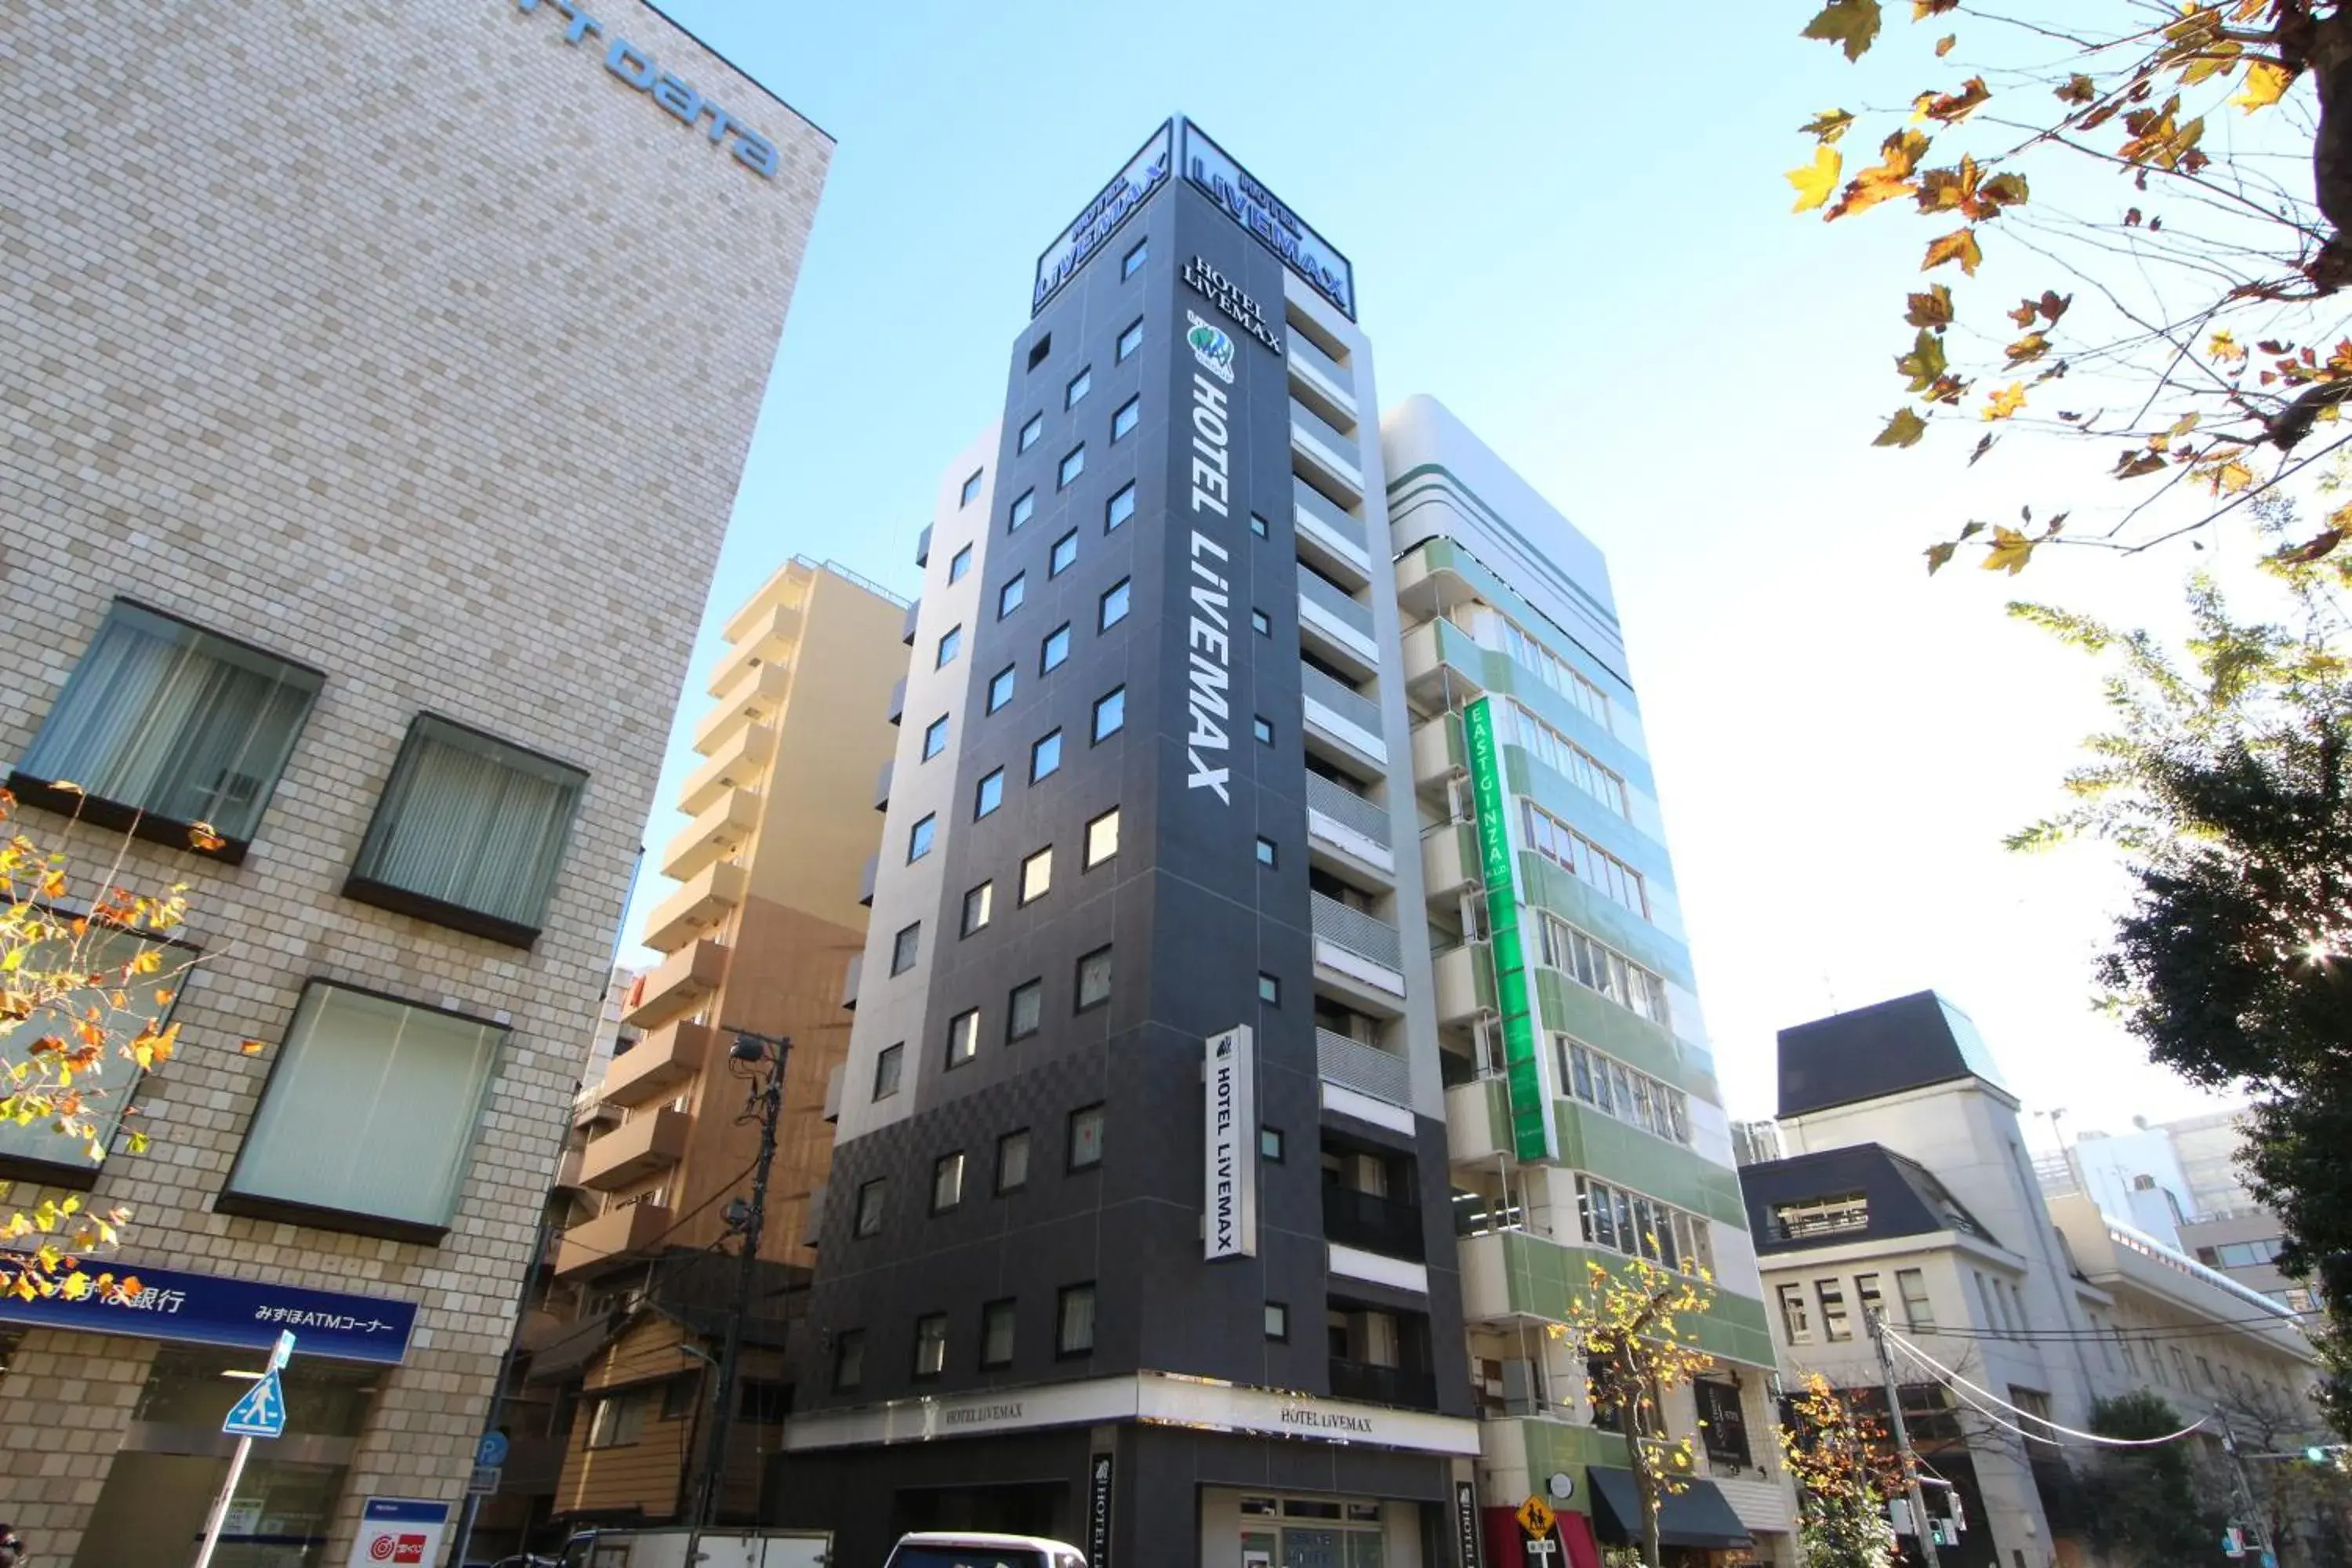 Property Building in HOTEL LiVEMAX Higashi Ginza